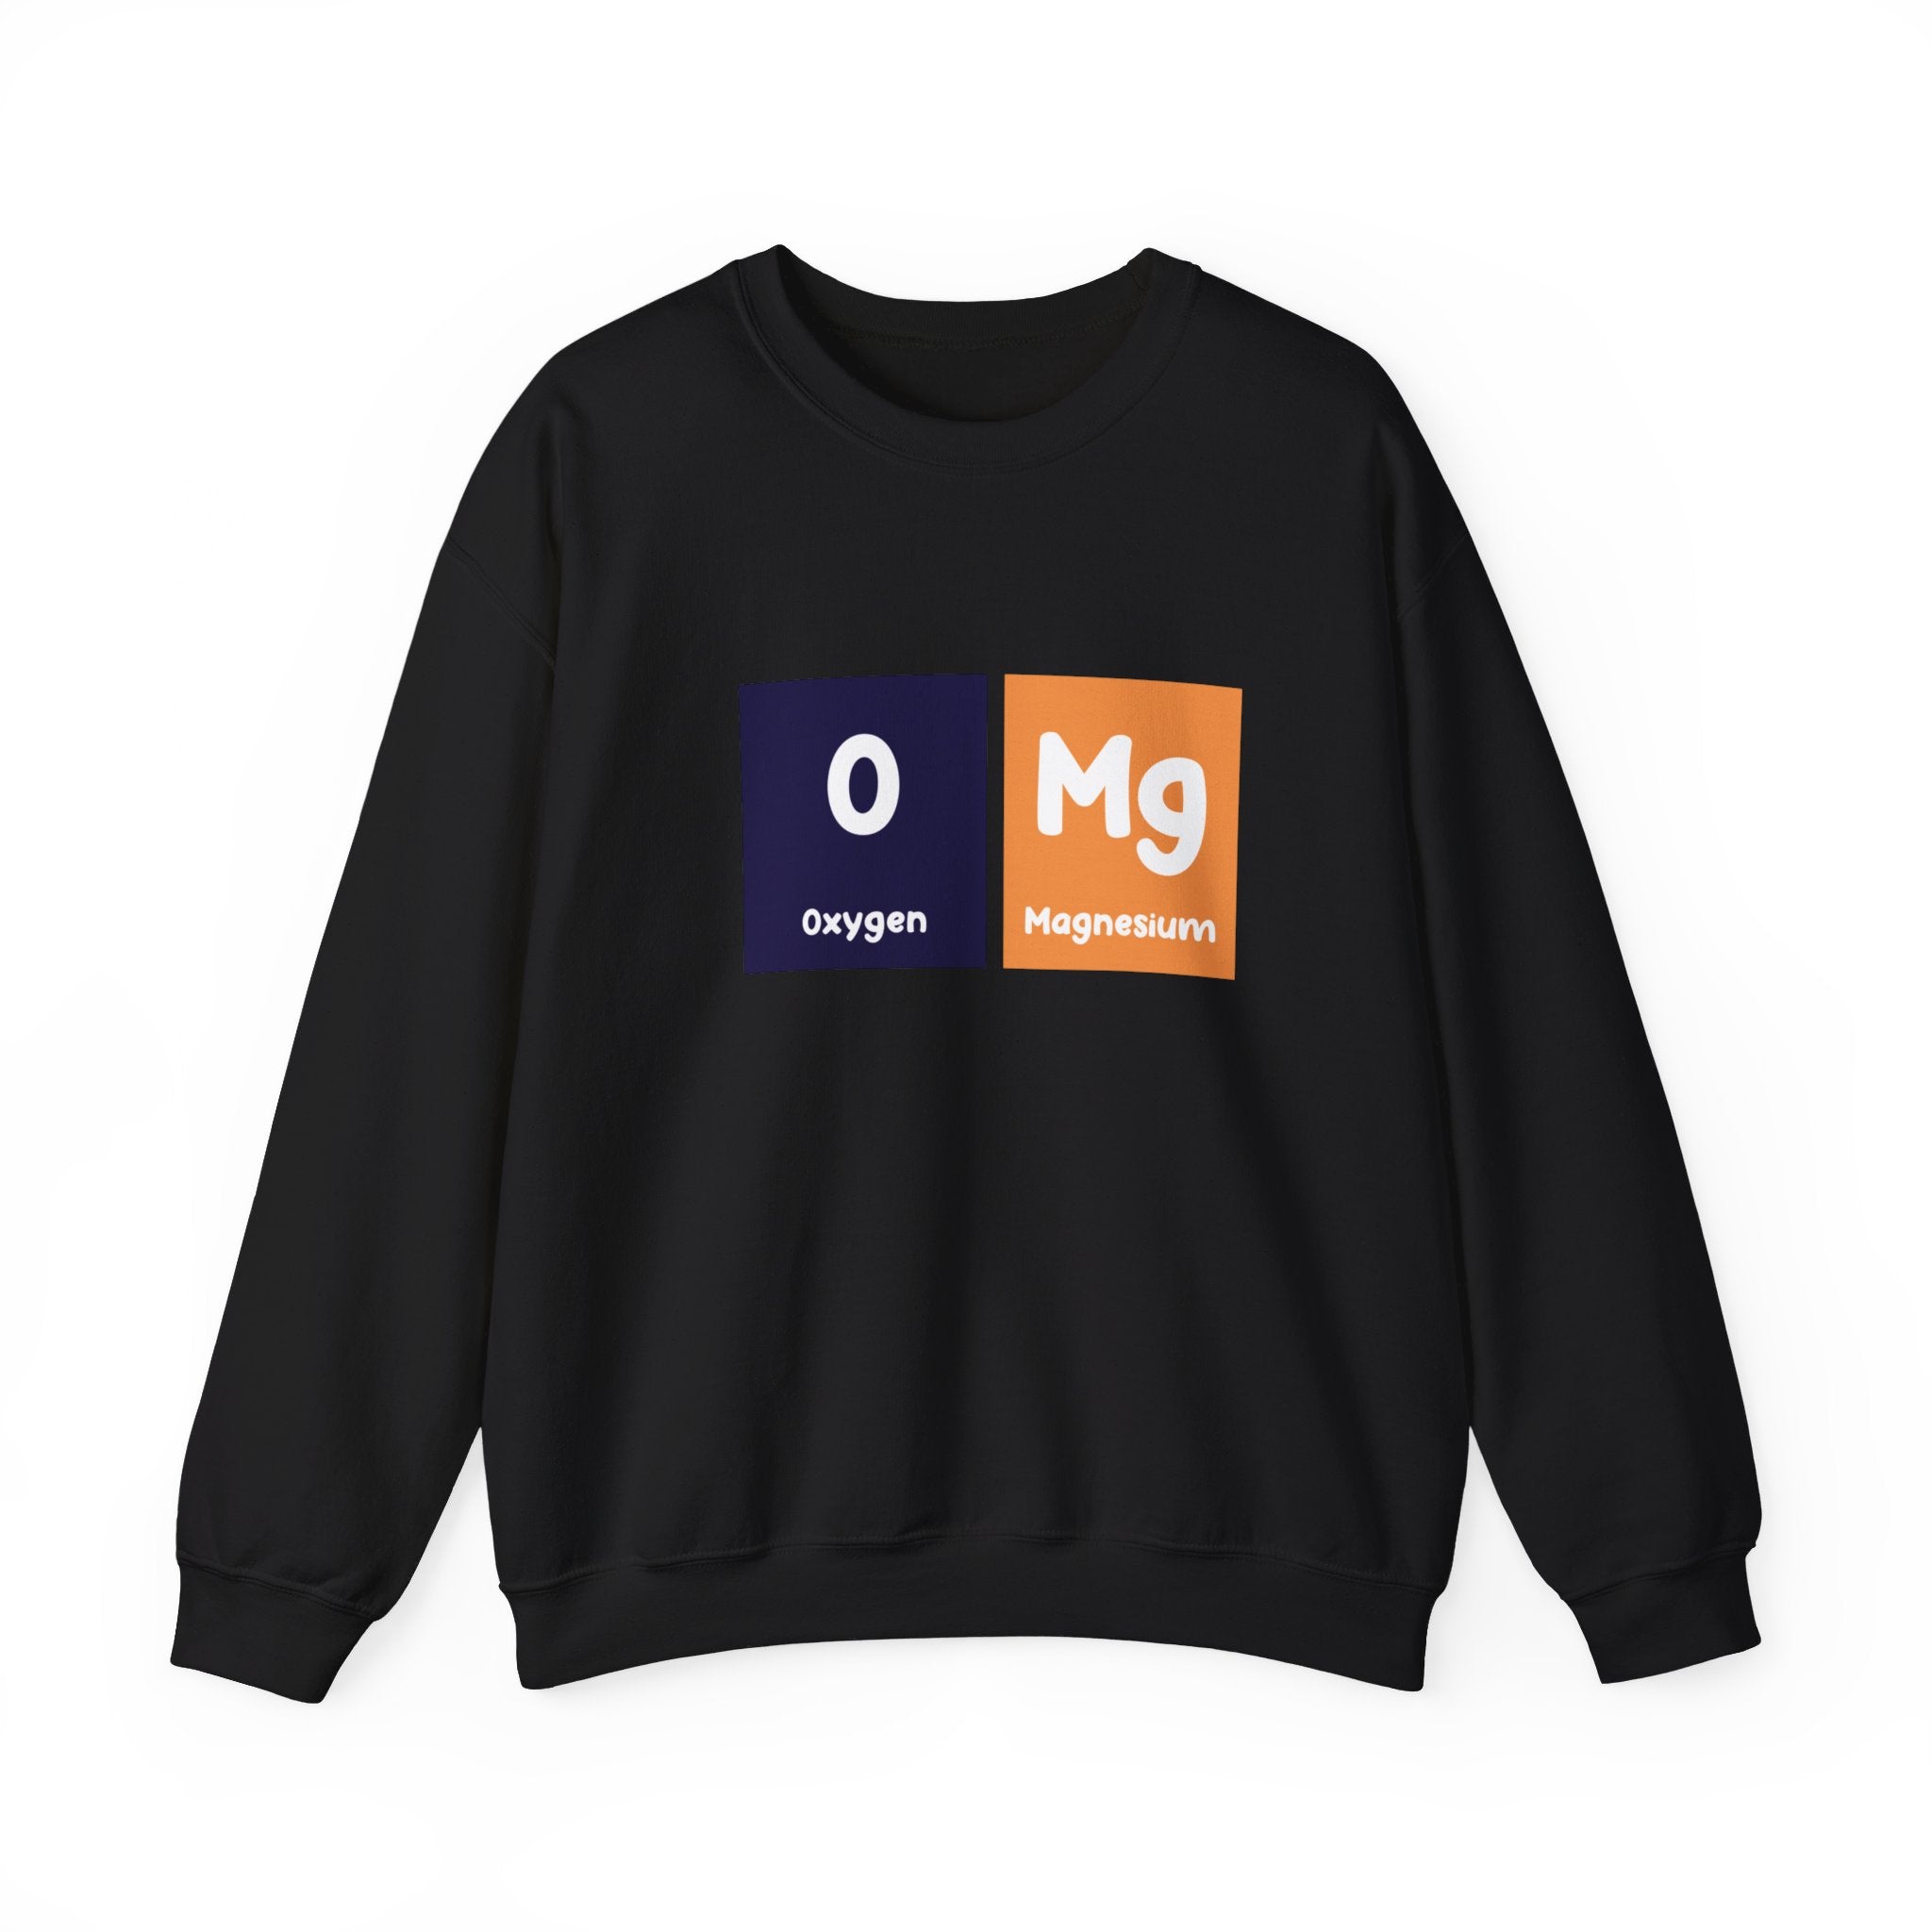 Stay cozy during the colder months with our O-Mg - Sweatshirt, featuring a unique wrap style and the periodic table symbols for oxygen (O) and magnesium (Mg) on the front.